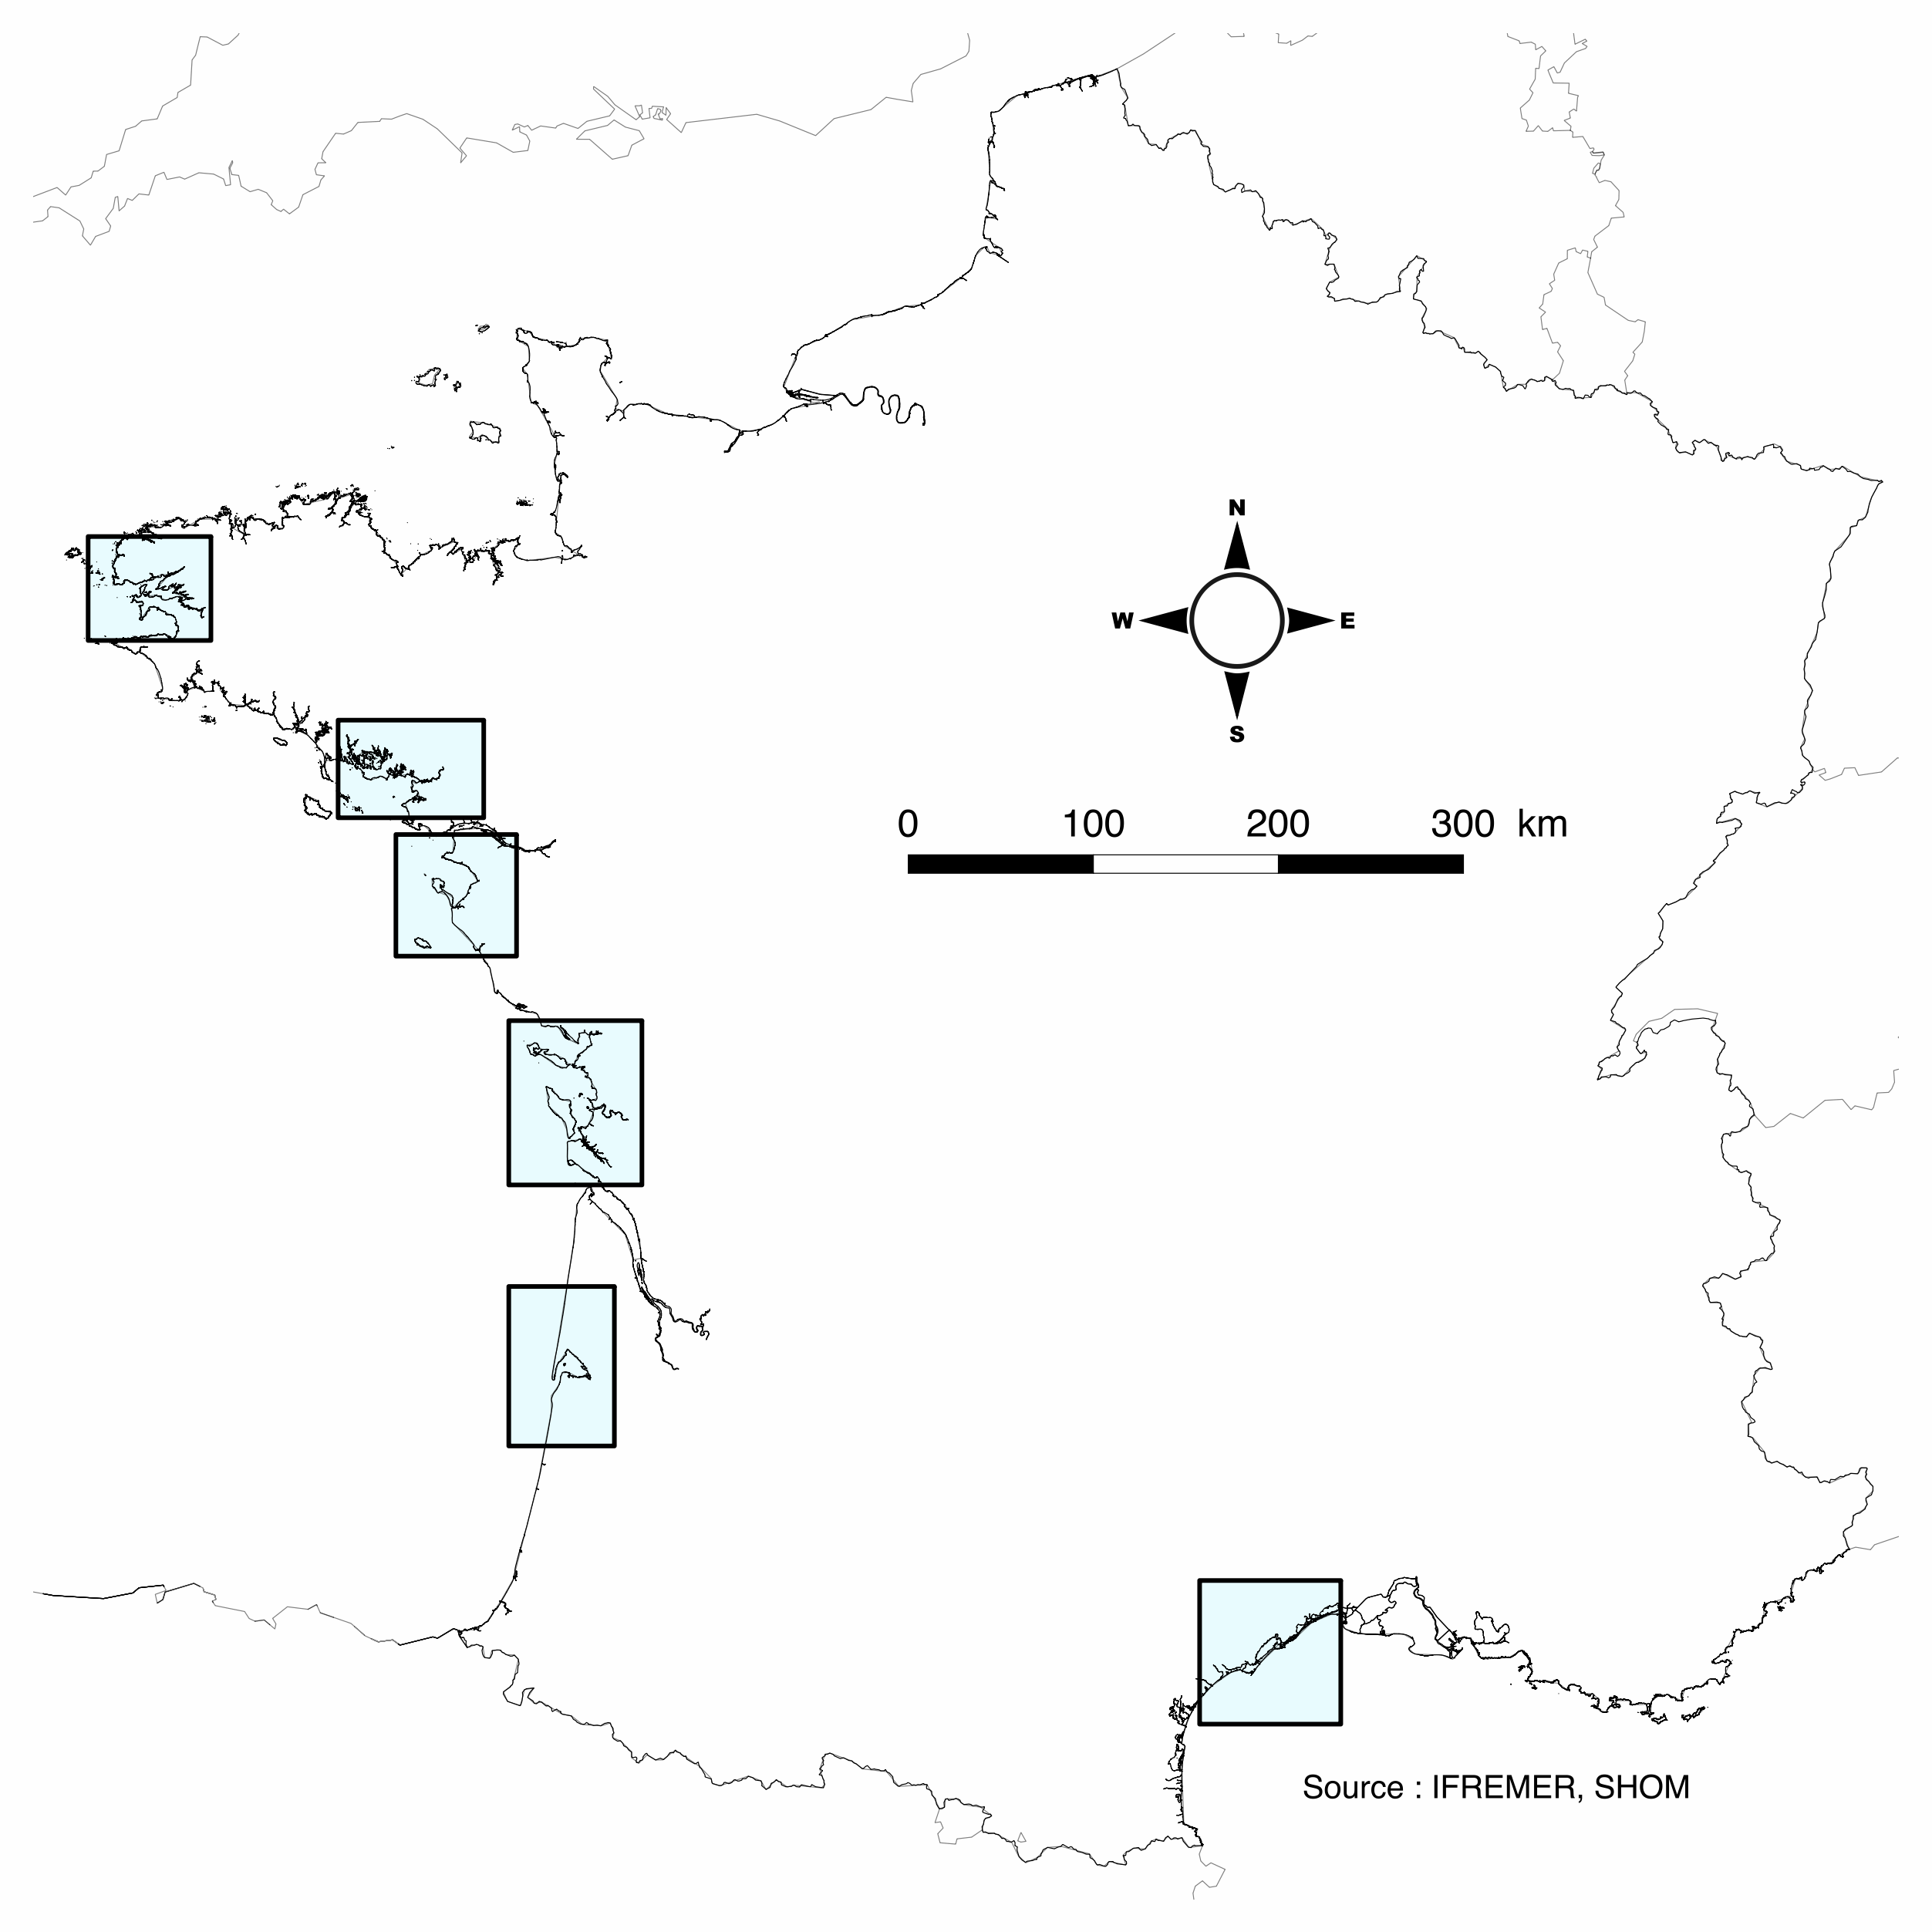 Location of the different Velyger sites along the French coast